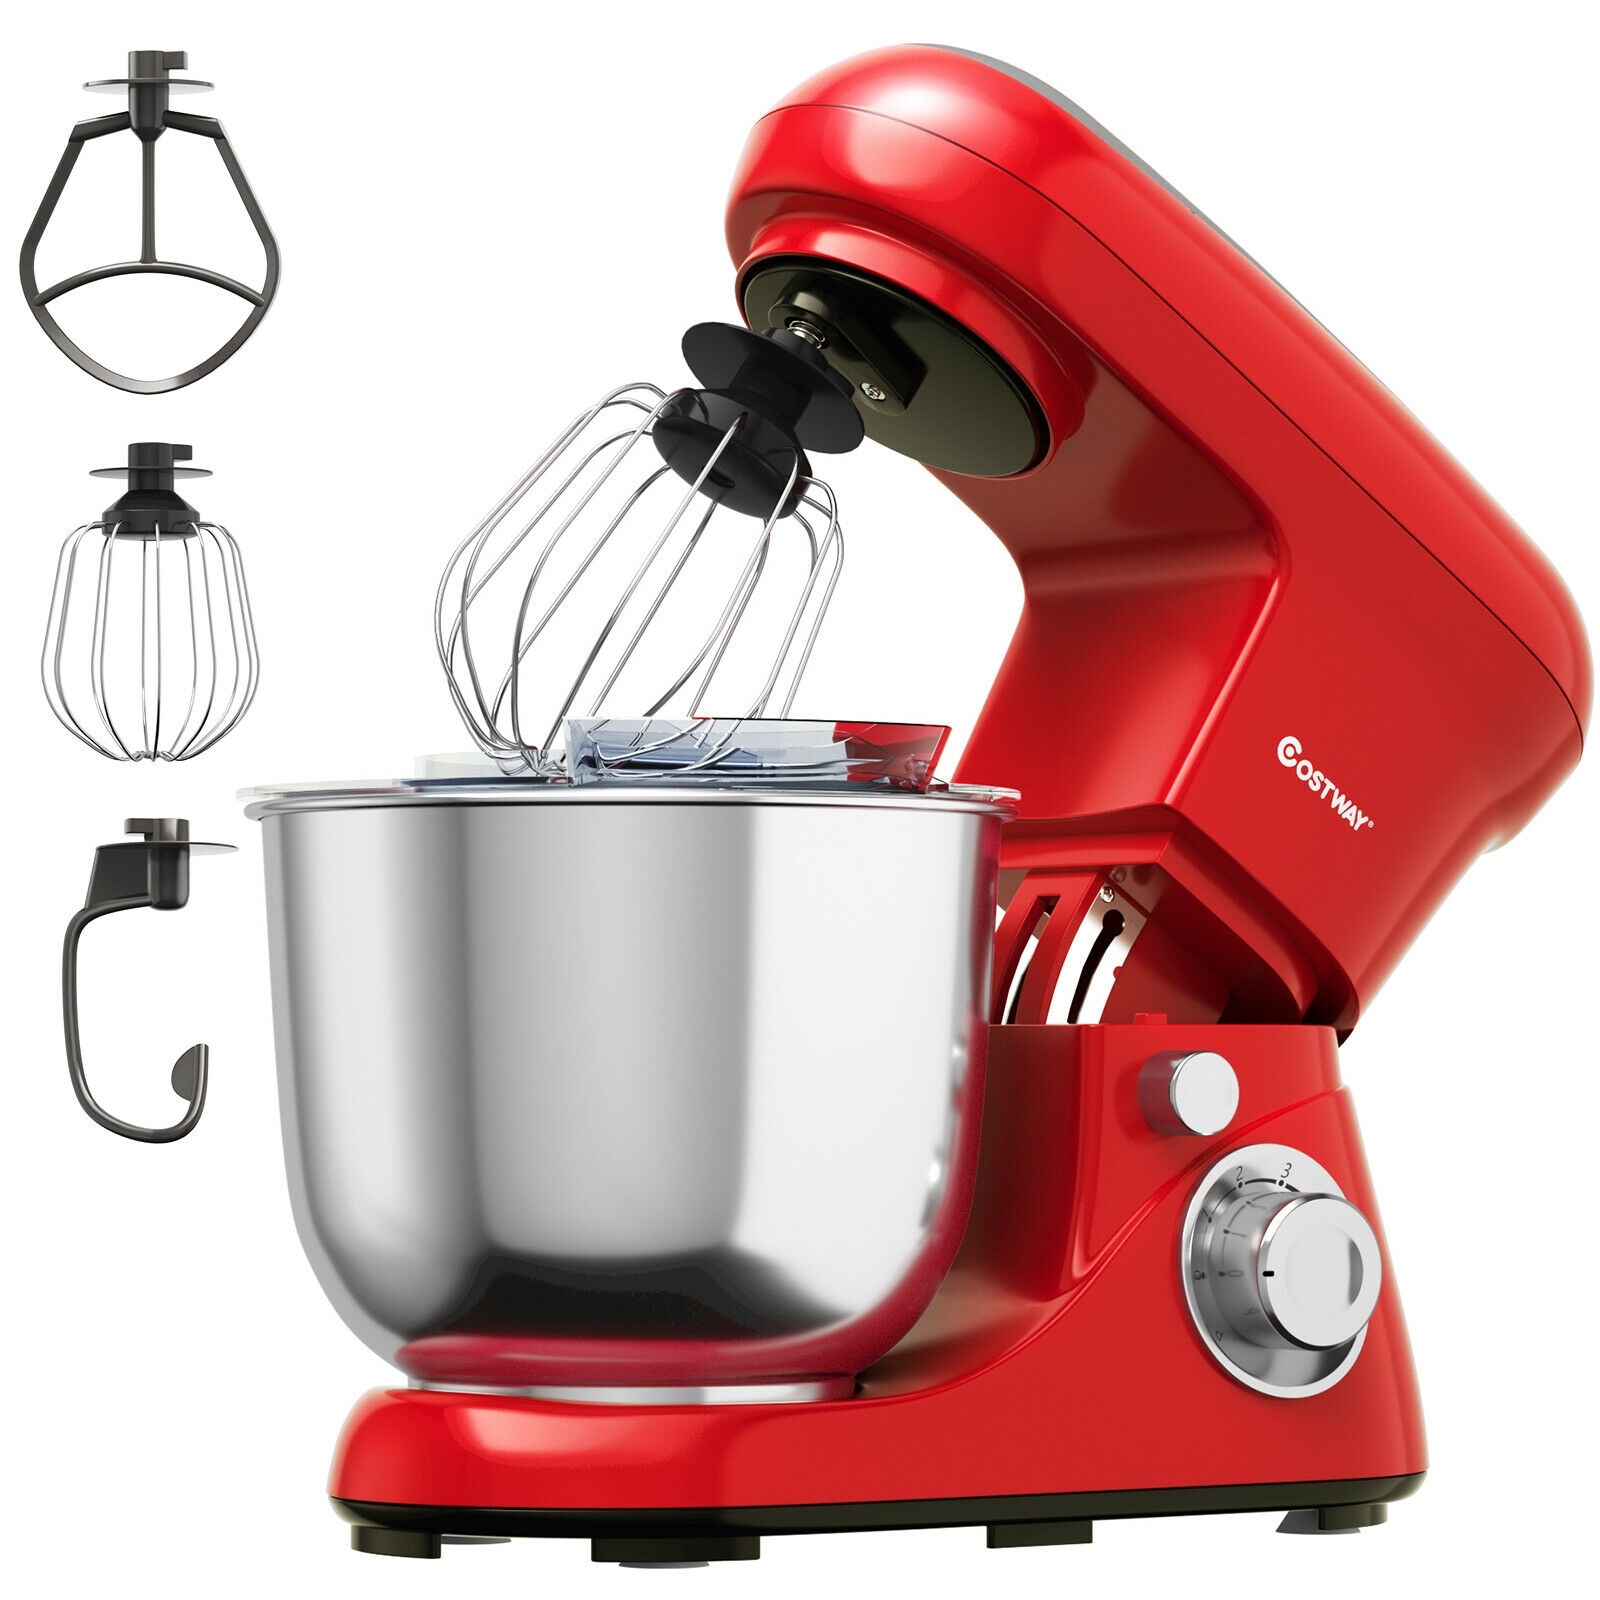 GZMR 5.3-Quart 6-Speed Red Residential Stand Mixer in Stand Mixers at Lowes.com